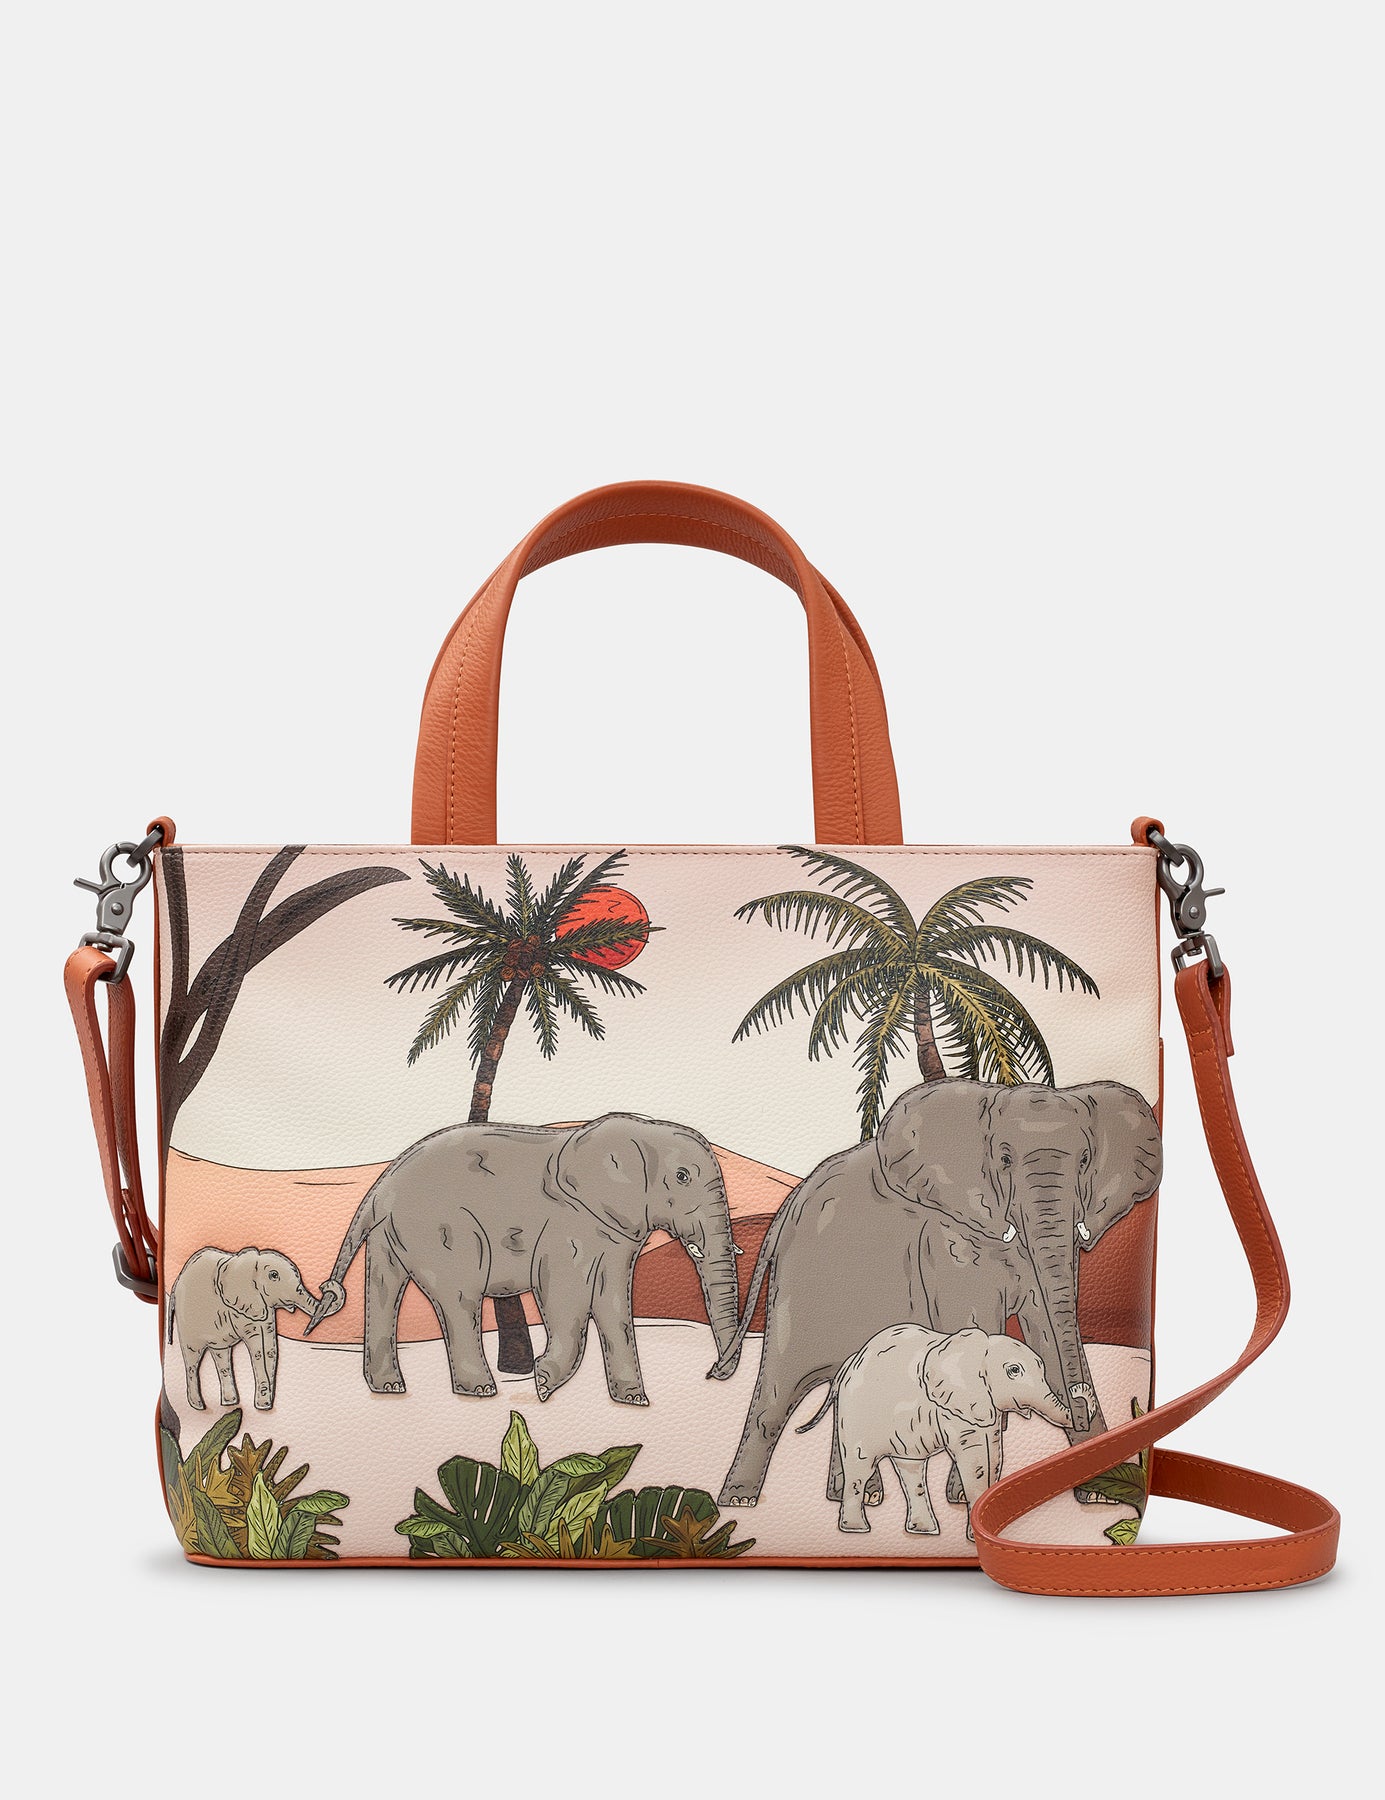 Horton the Elephant at the Macys Parade Tote Bag by Mark Chandler - Pixels